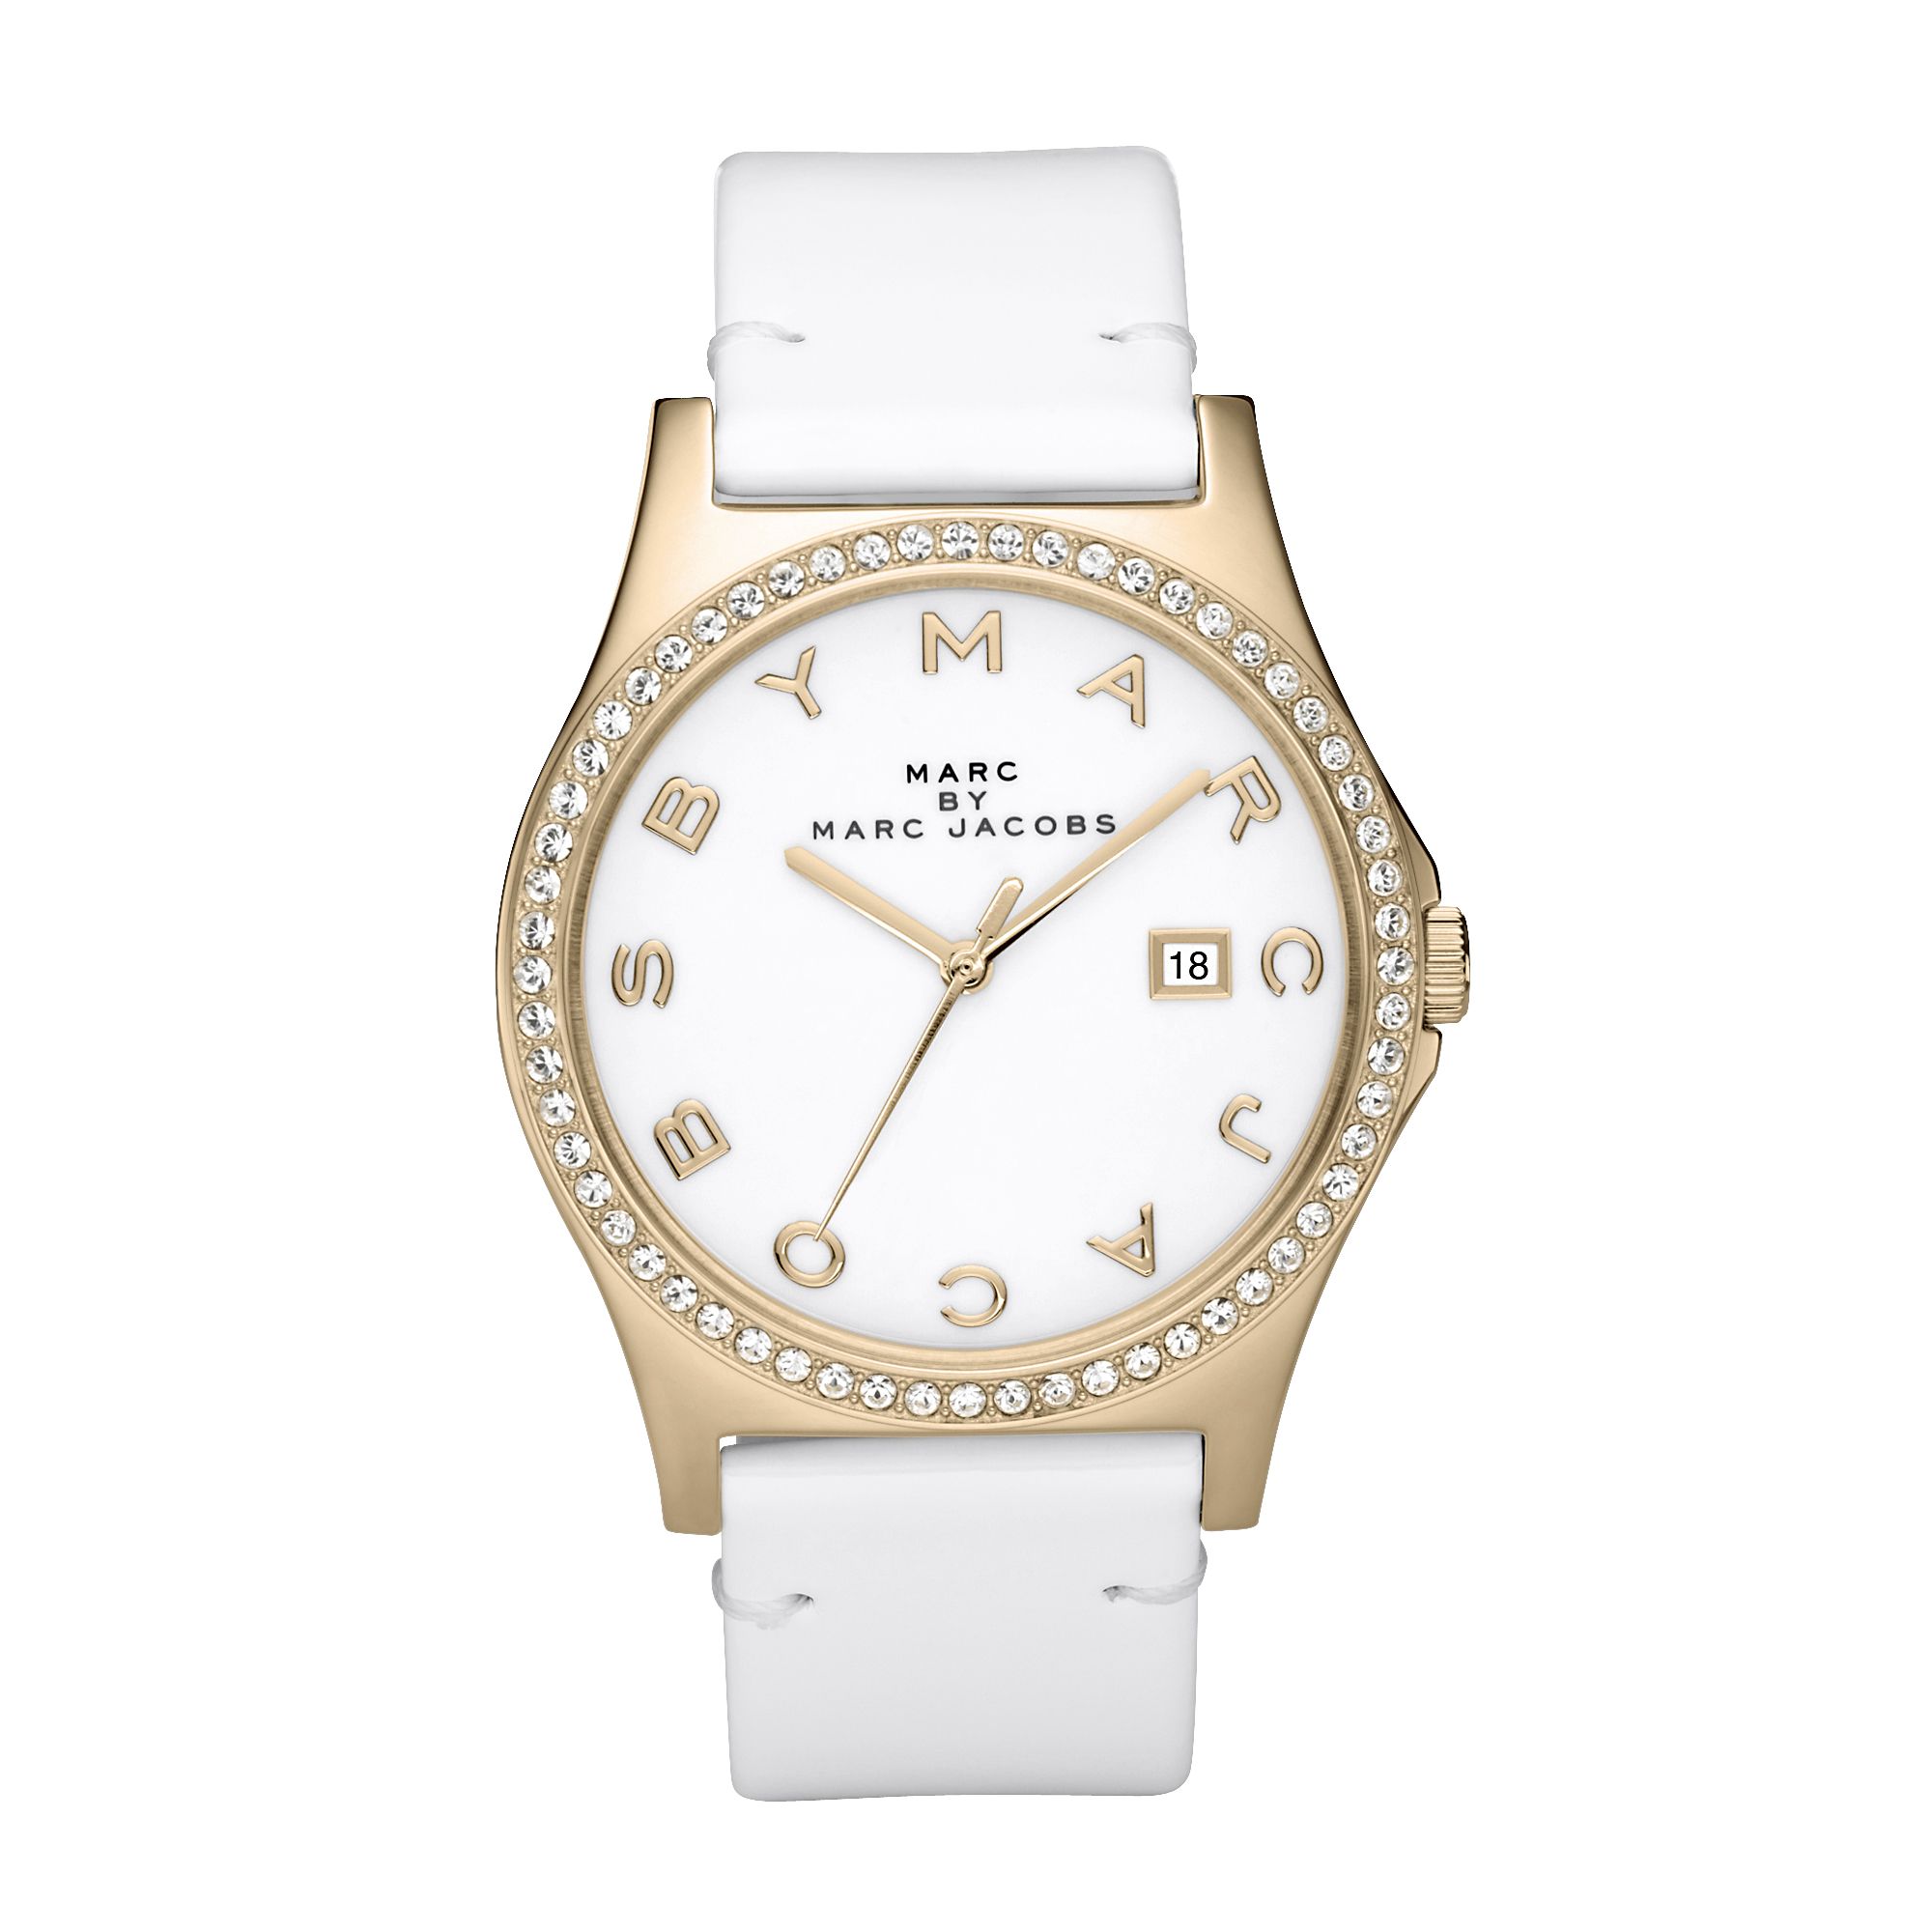 Marc by Marc Jacobs Women's Patent Leather Strap Watch, White at John Lewis